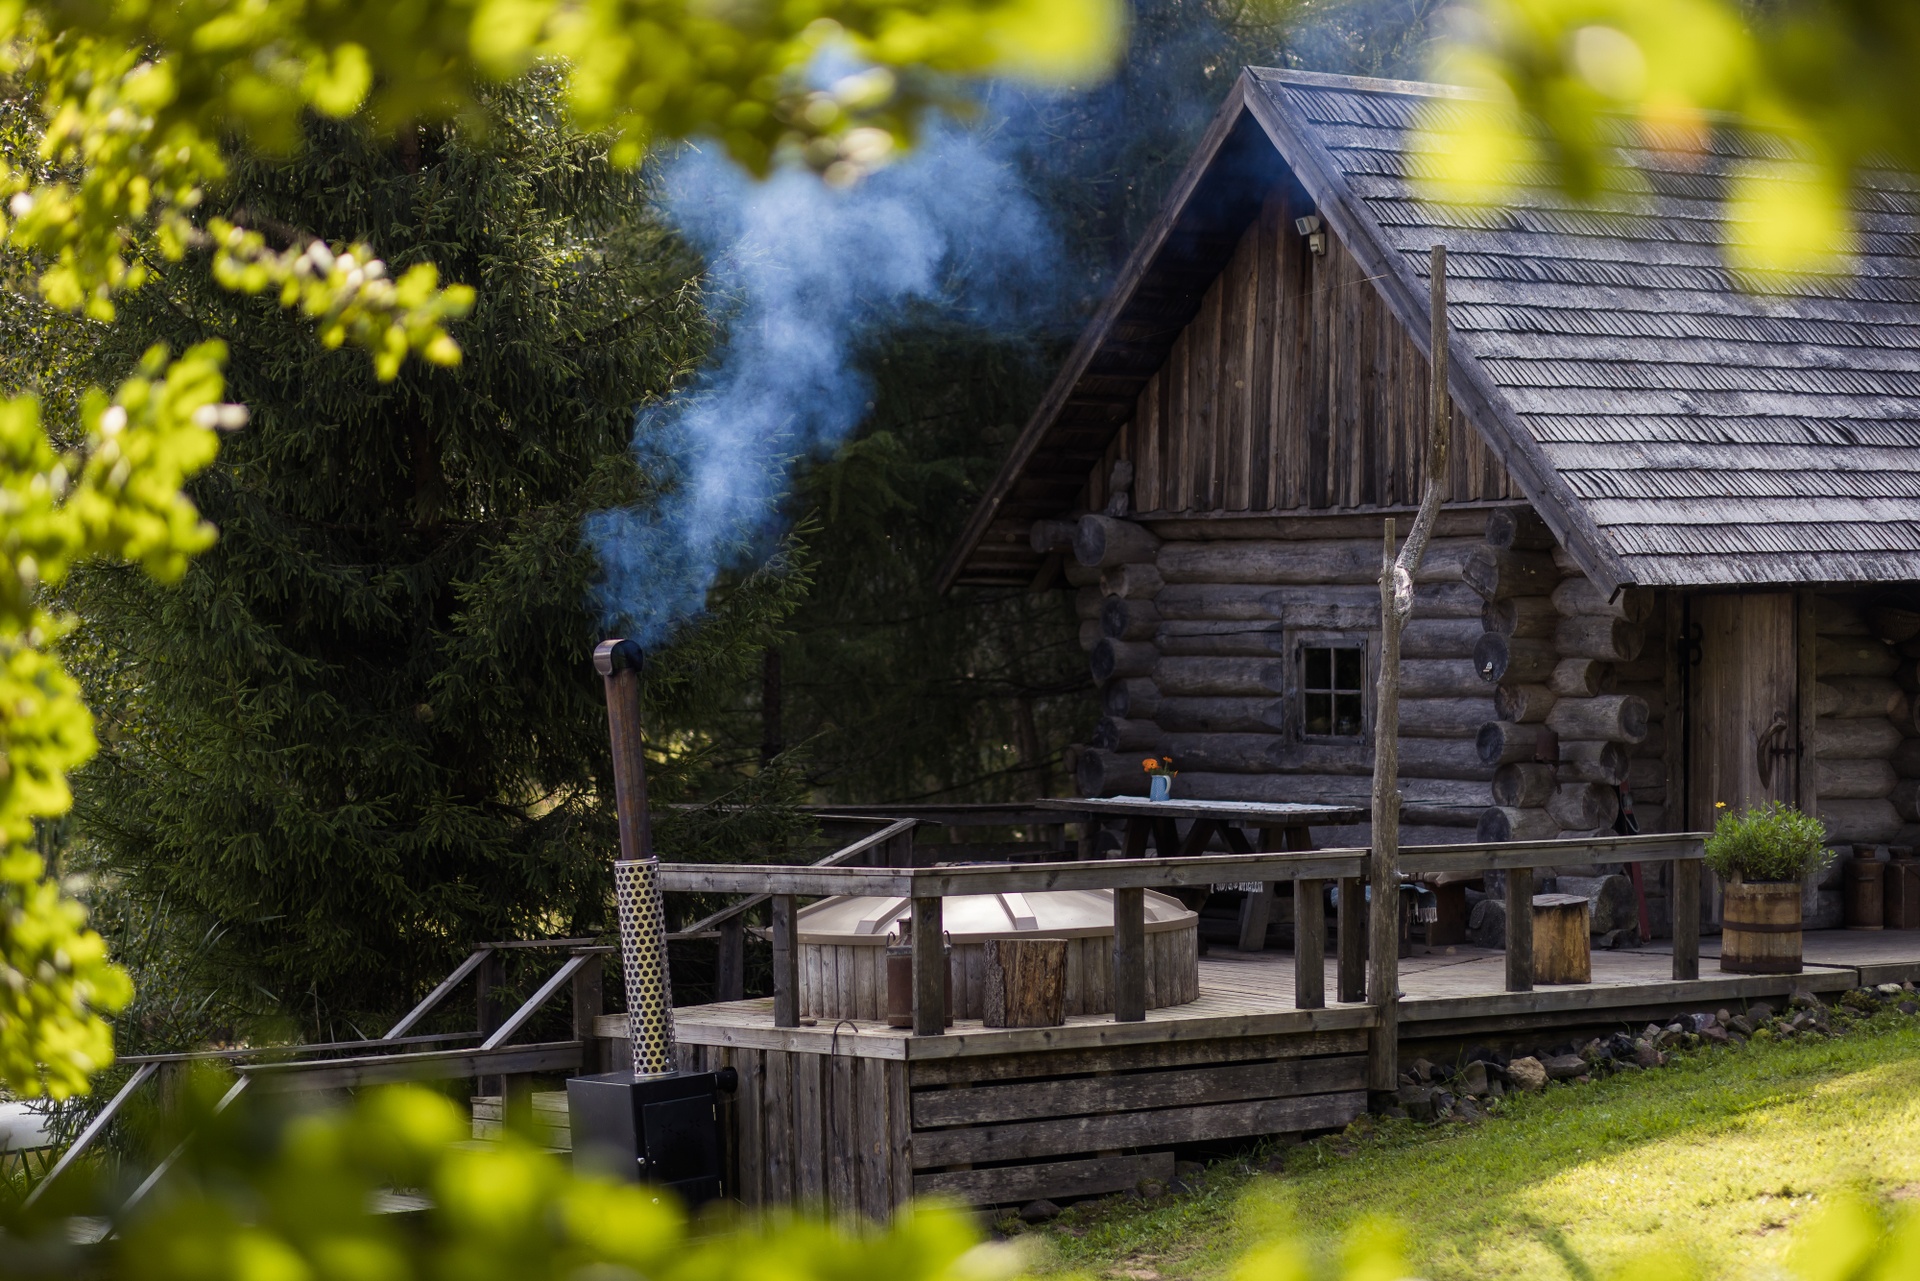 An inside look at the Võro smoke sauna tradition